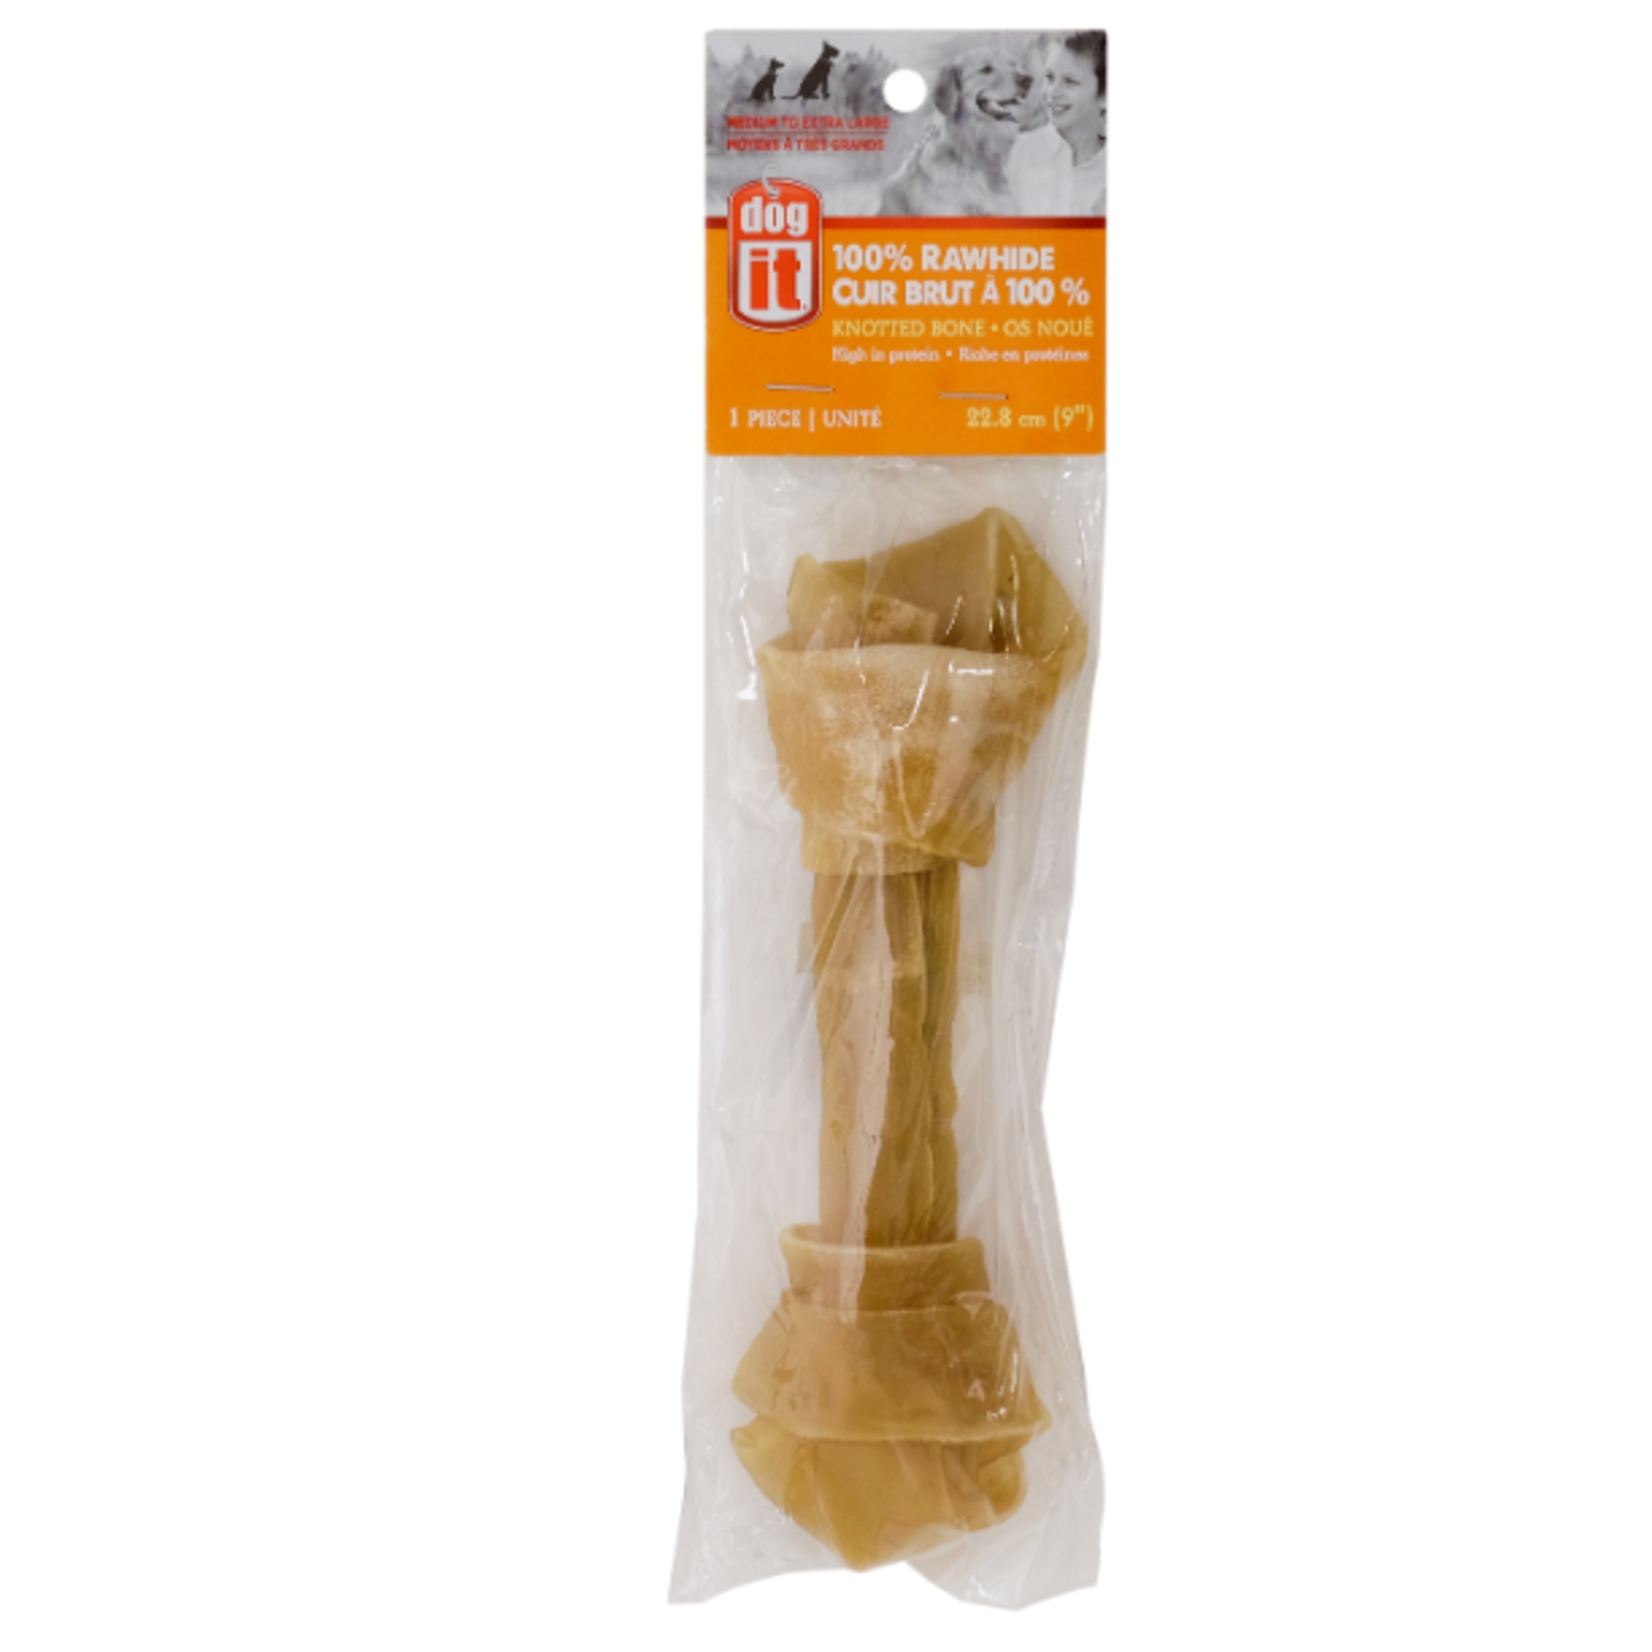 Dogit 100% Rawhide - Knotted Bone - 9 in